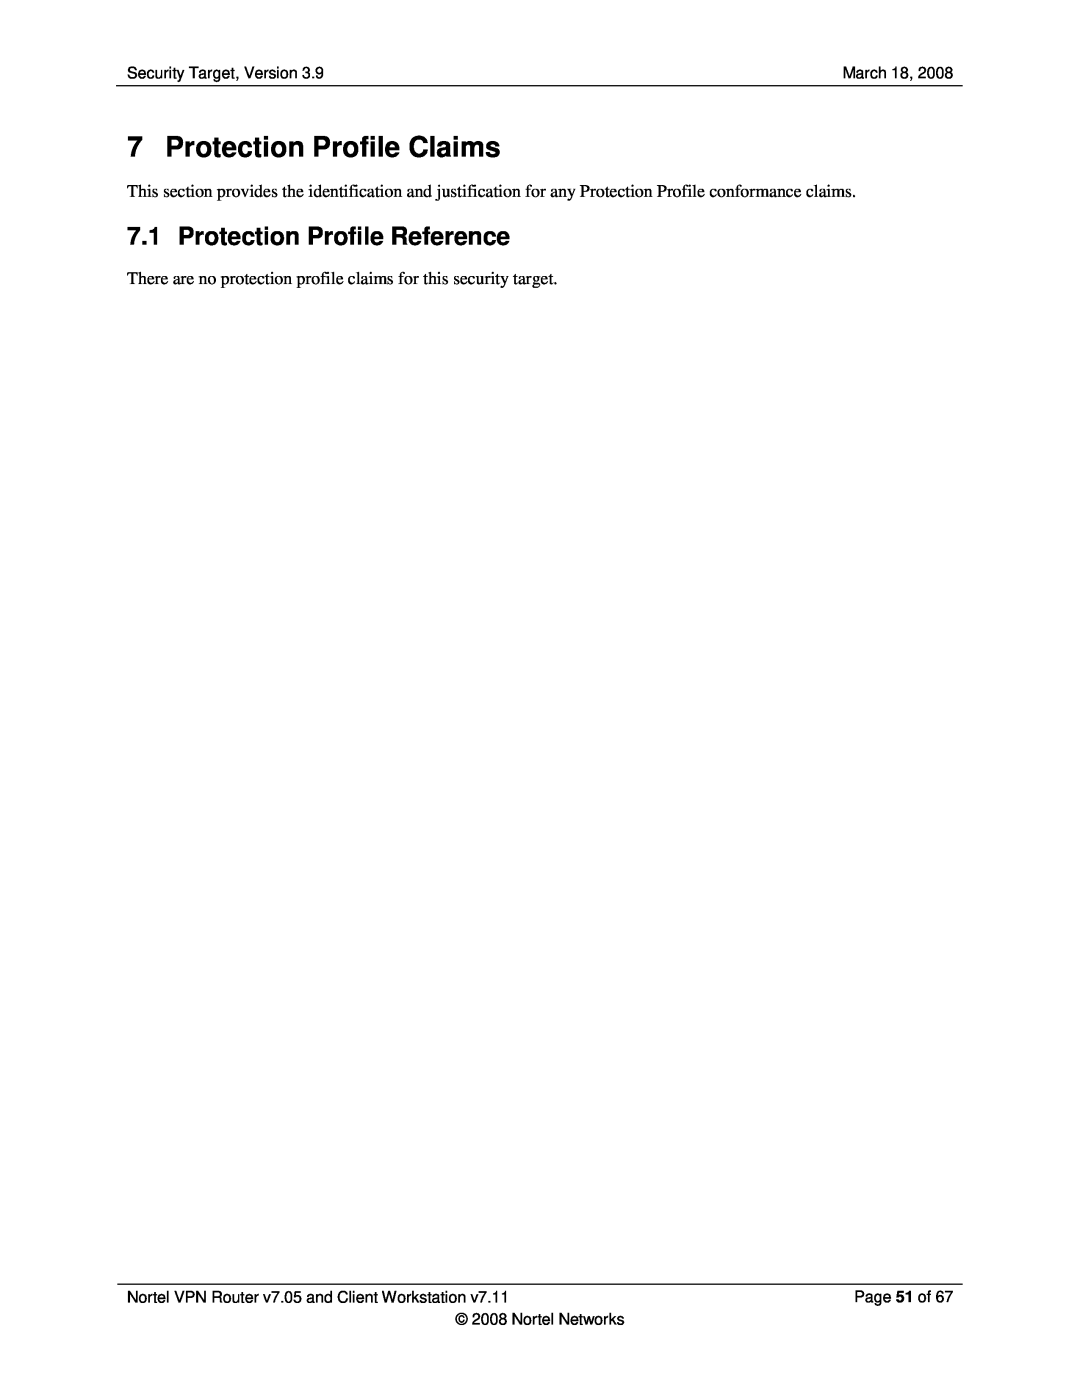 Nortel Networks 7.11, 7.05 manual Protection Profile Claims, Protection Profile Reference 